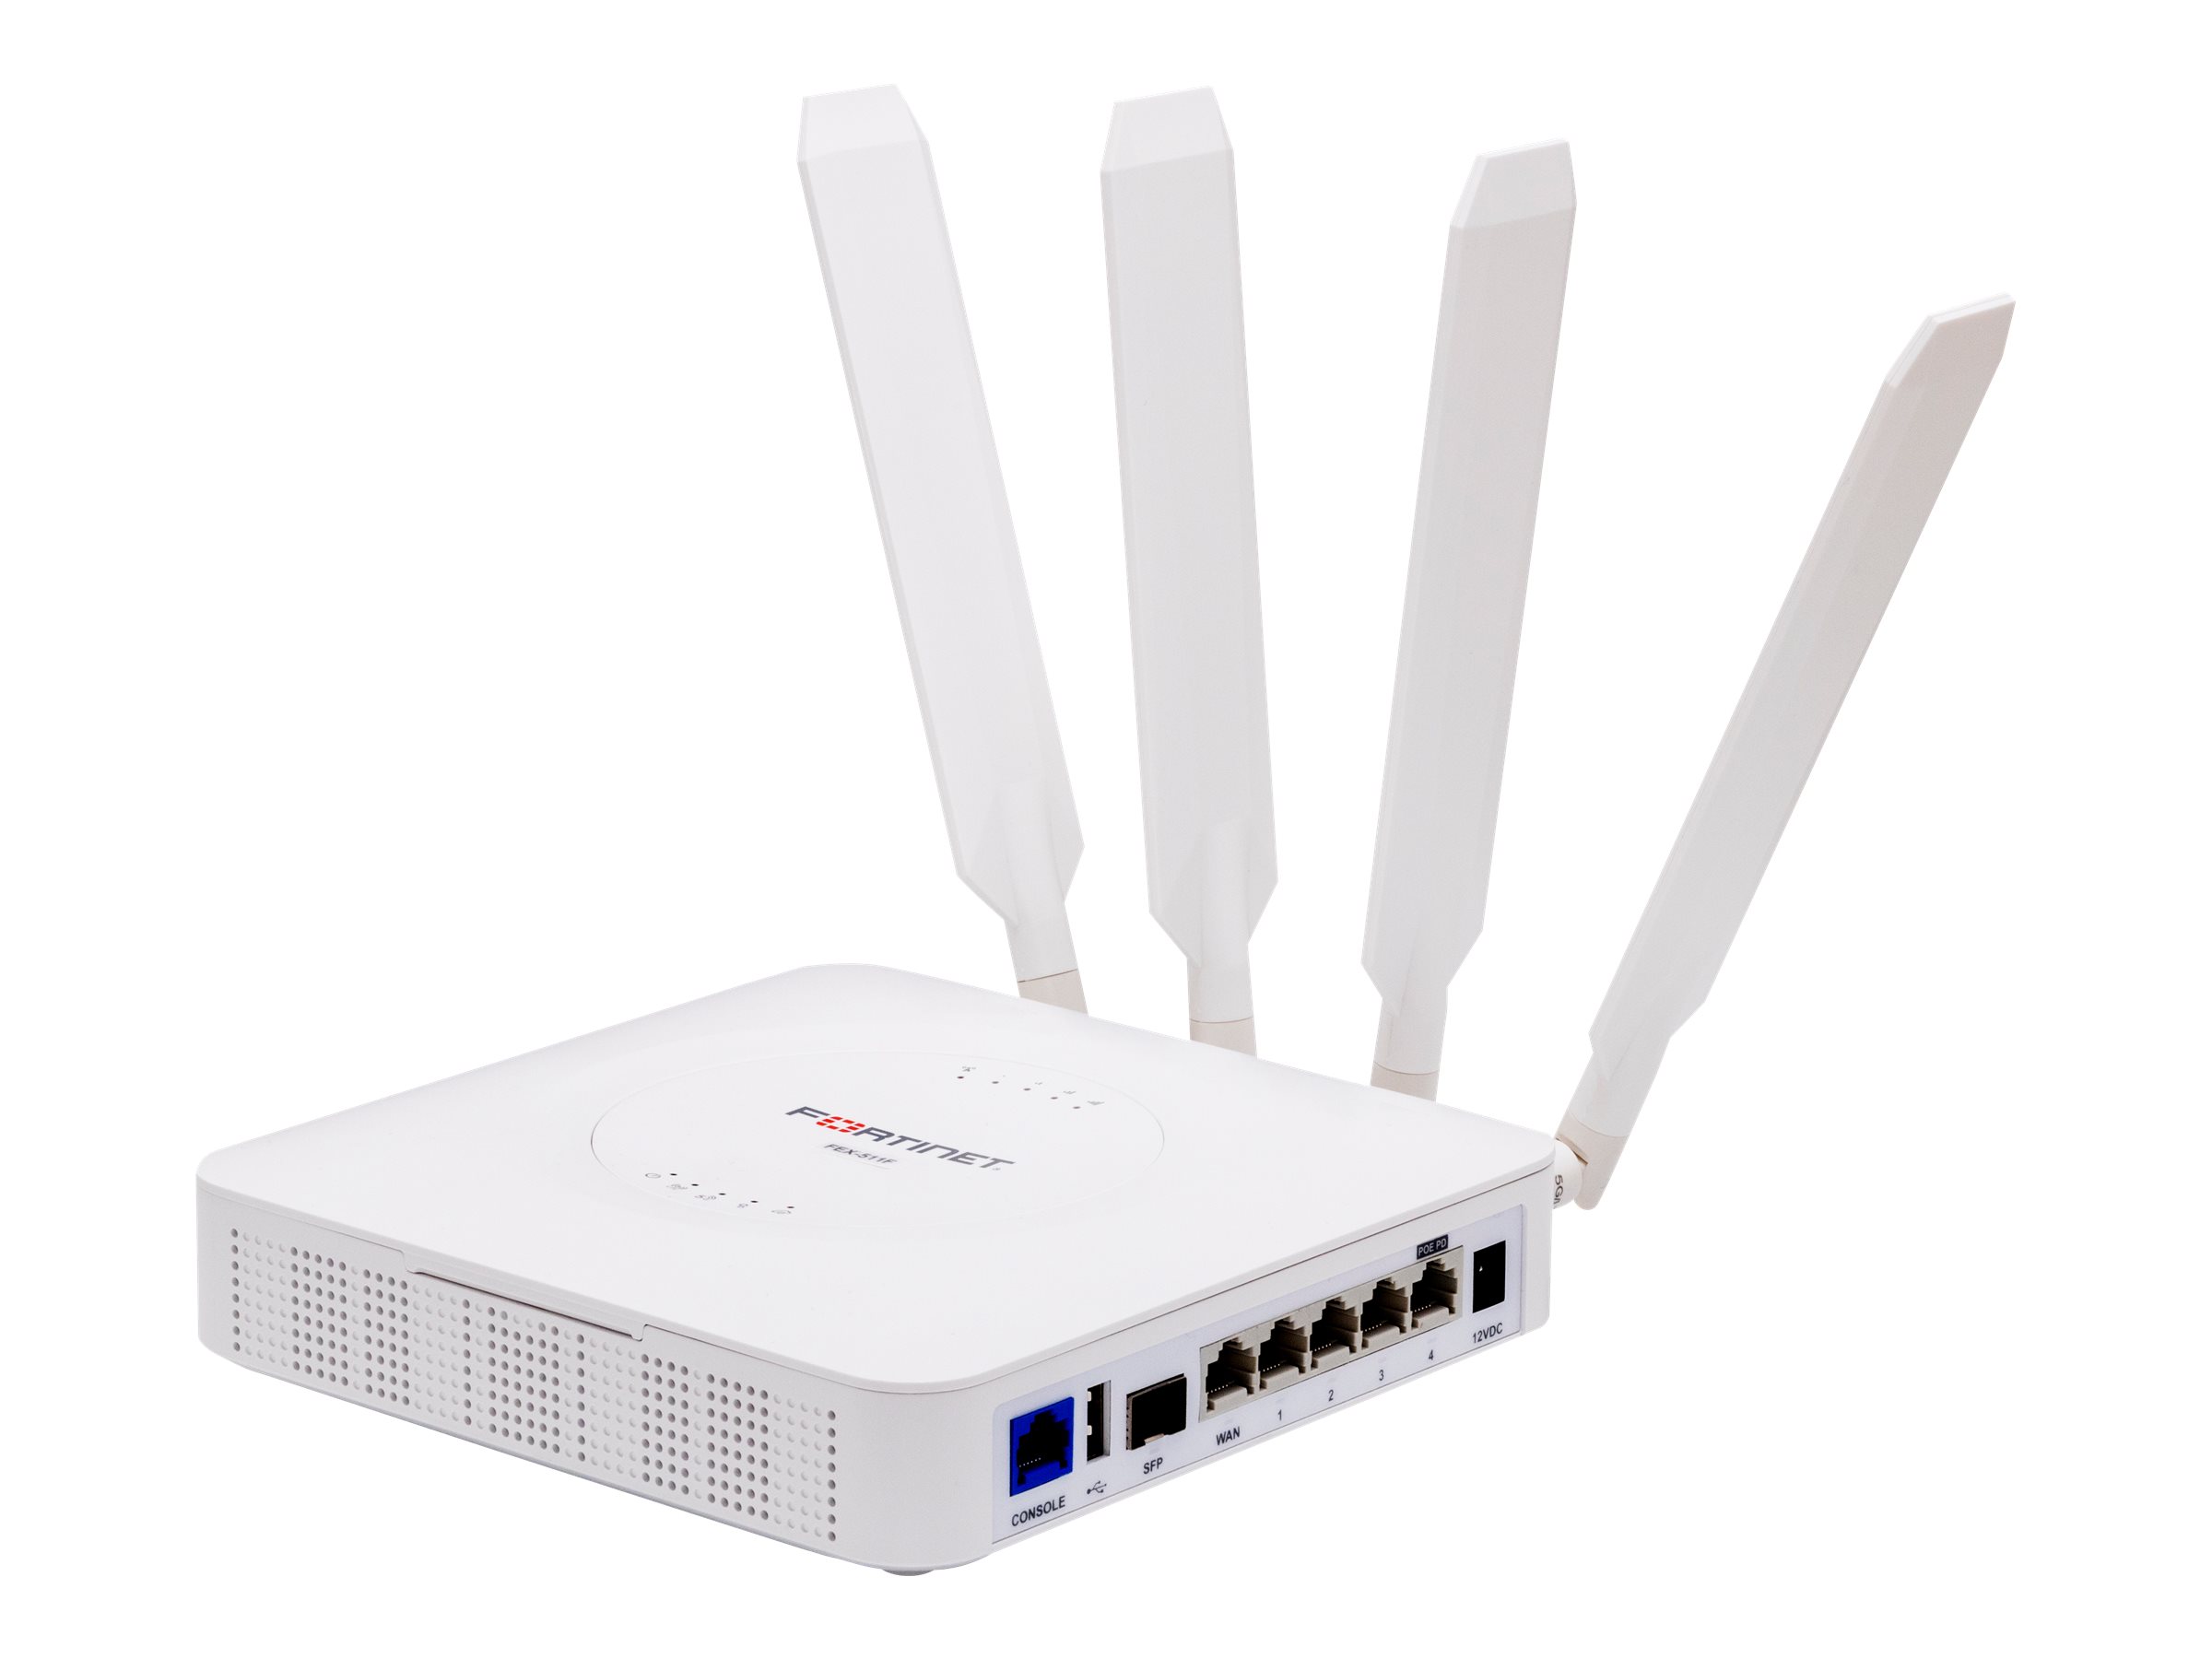 Fortinet ask for better price 12m Warranty FortiExtender 511F - - Router - - WWAN - 1GbE - Bluetooth - wandmontierbar